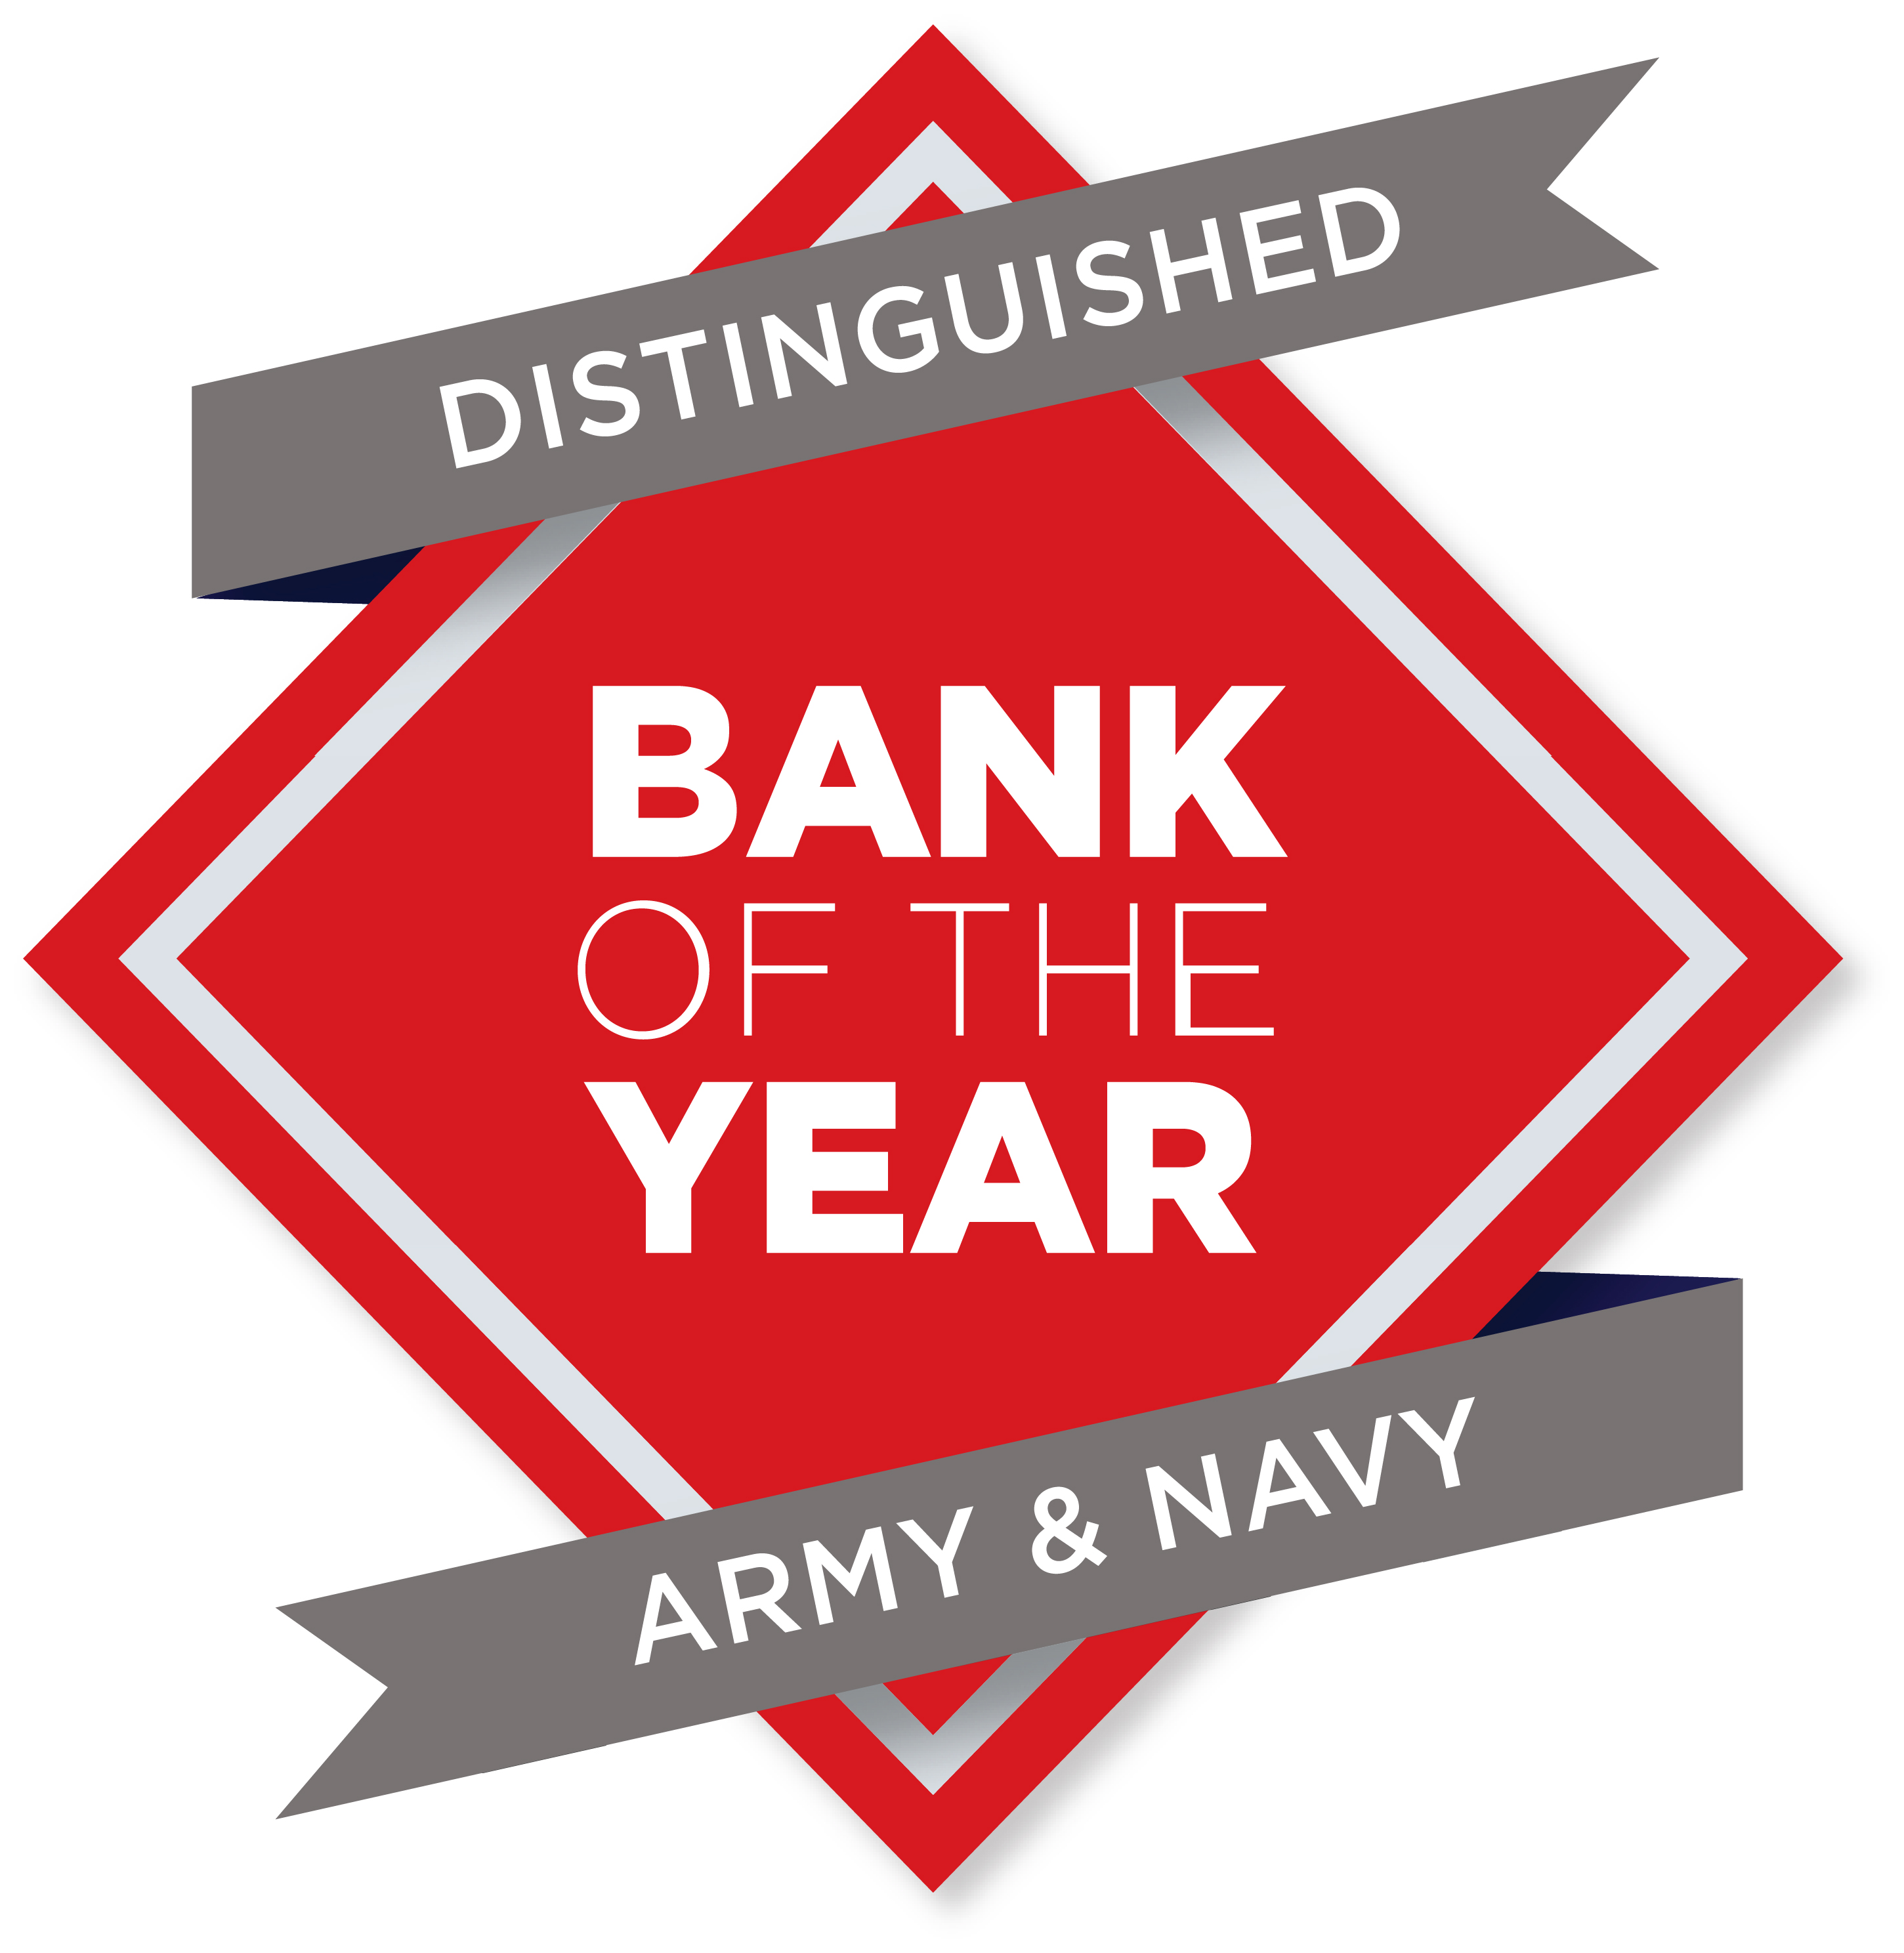 Armed Forces Bank (AFB) has been named “Distinguished Bank of the Year” by the Army and Navy.